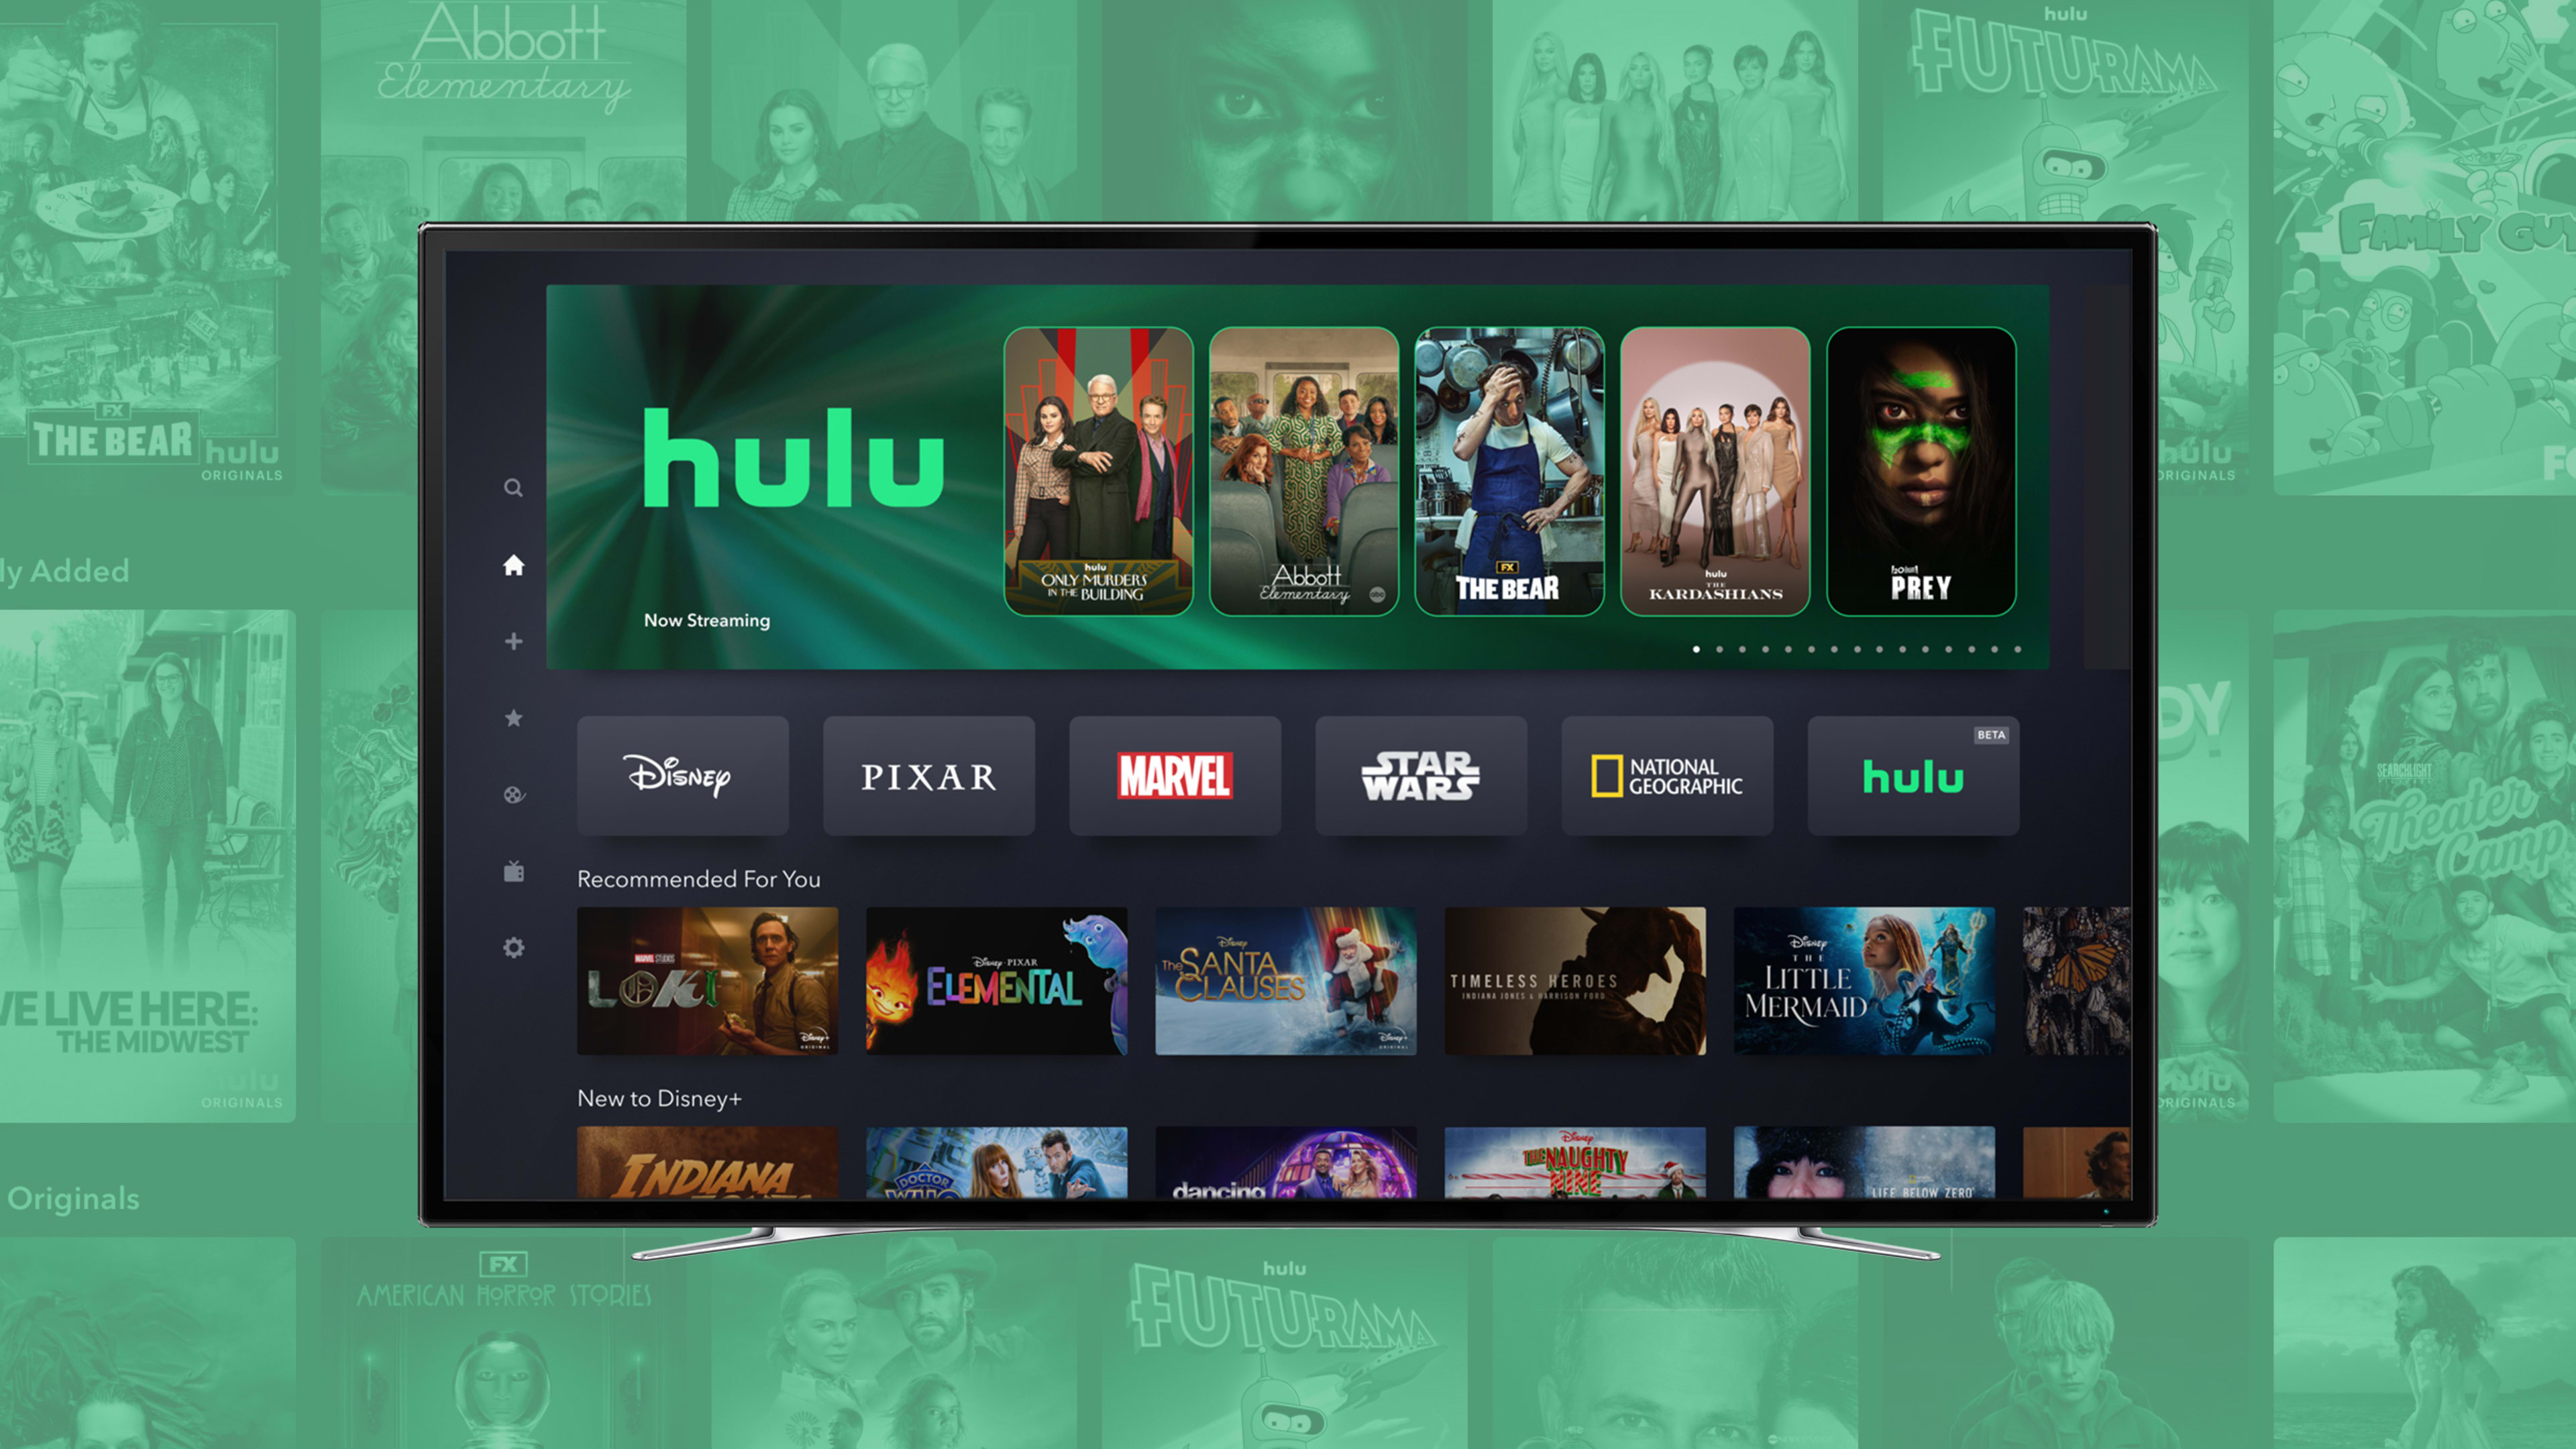 Why Disney Plus’s new Hulu integration was such a huge, high-stakes challenge